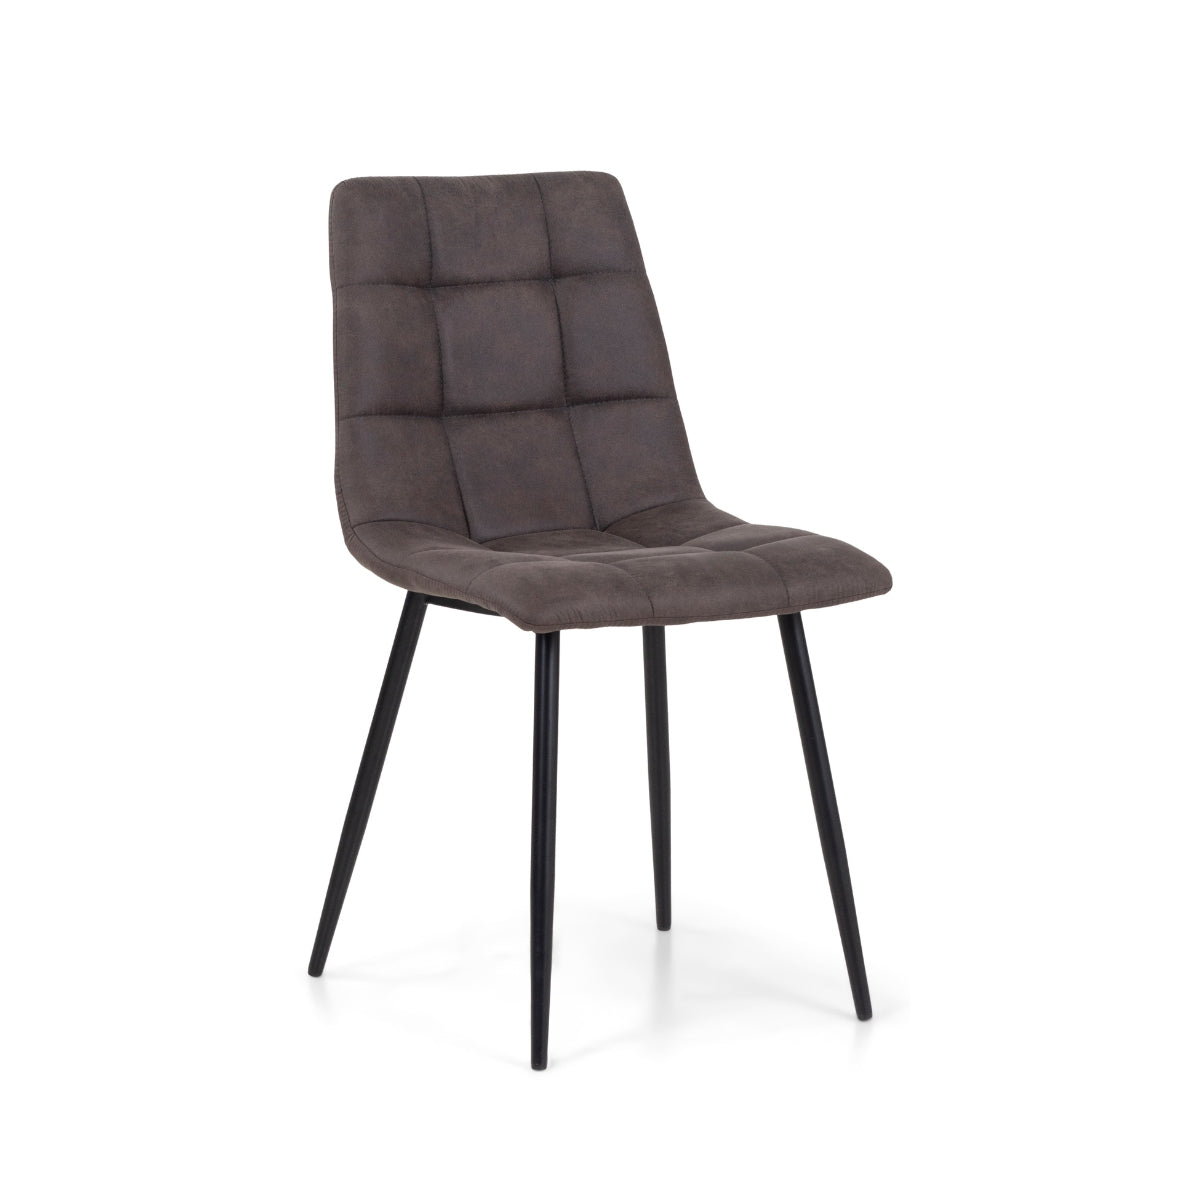 CARLOS Dining Chair - Tabacco